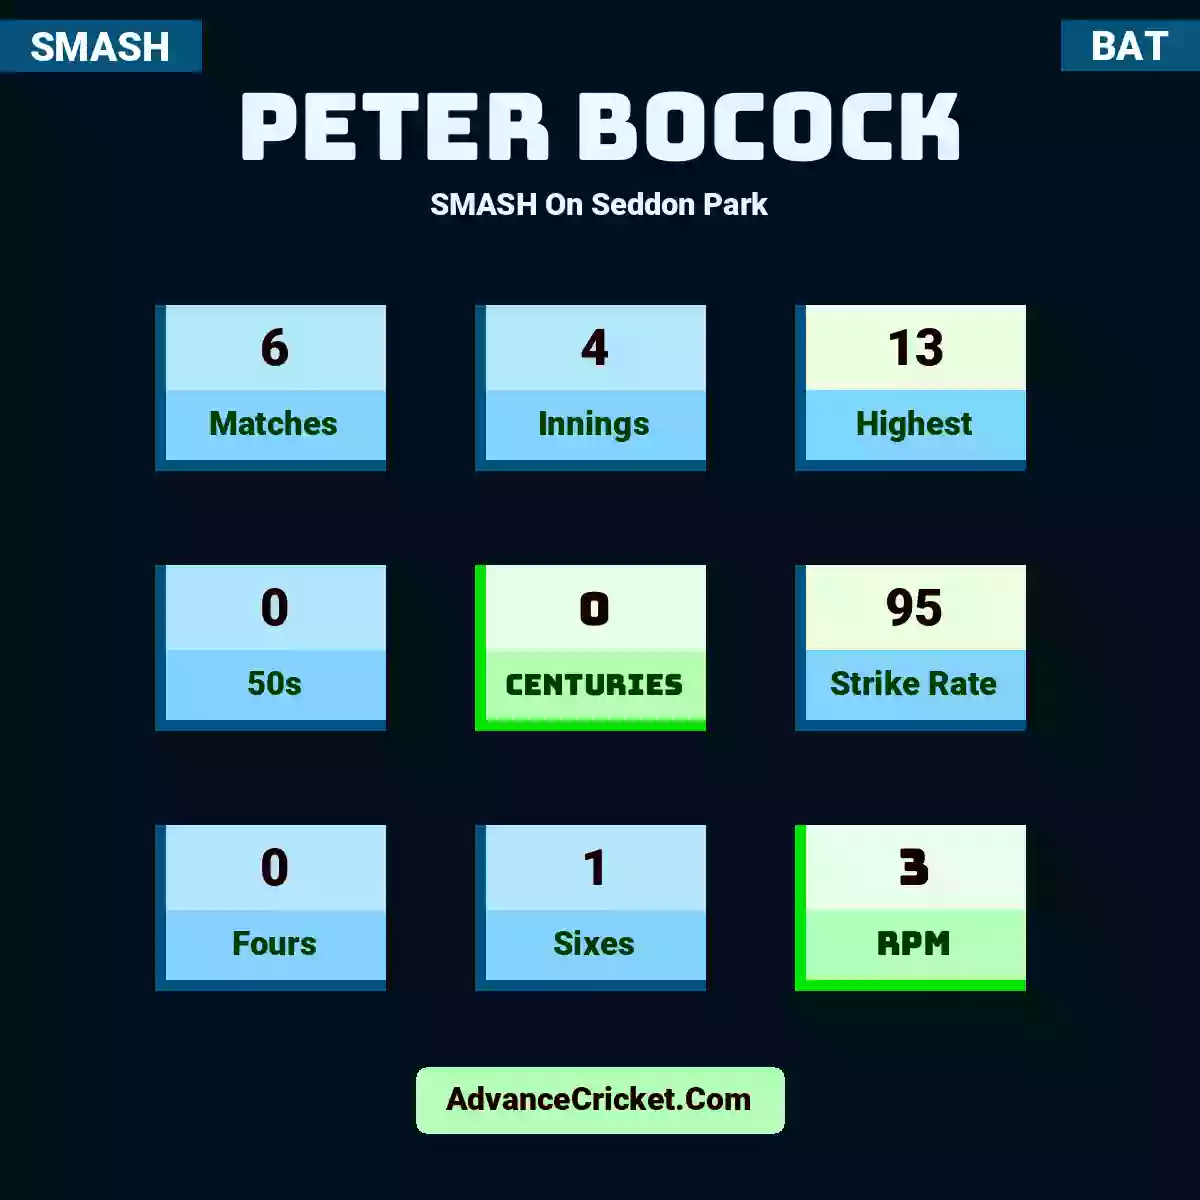 Peter Bocock SMASH  On Seddon Park, Peter Bocock played 6 matches, scored 13 runs as highest, 0 half-centuries, and 0 centuries, with a strike rate of 95. P.Bocock hit 0 fours and 1 sixes, with an RPM of 3.